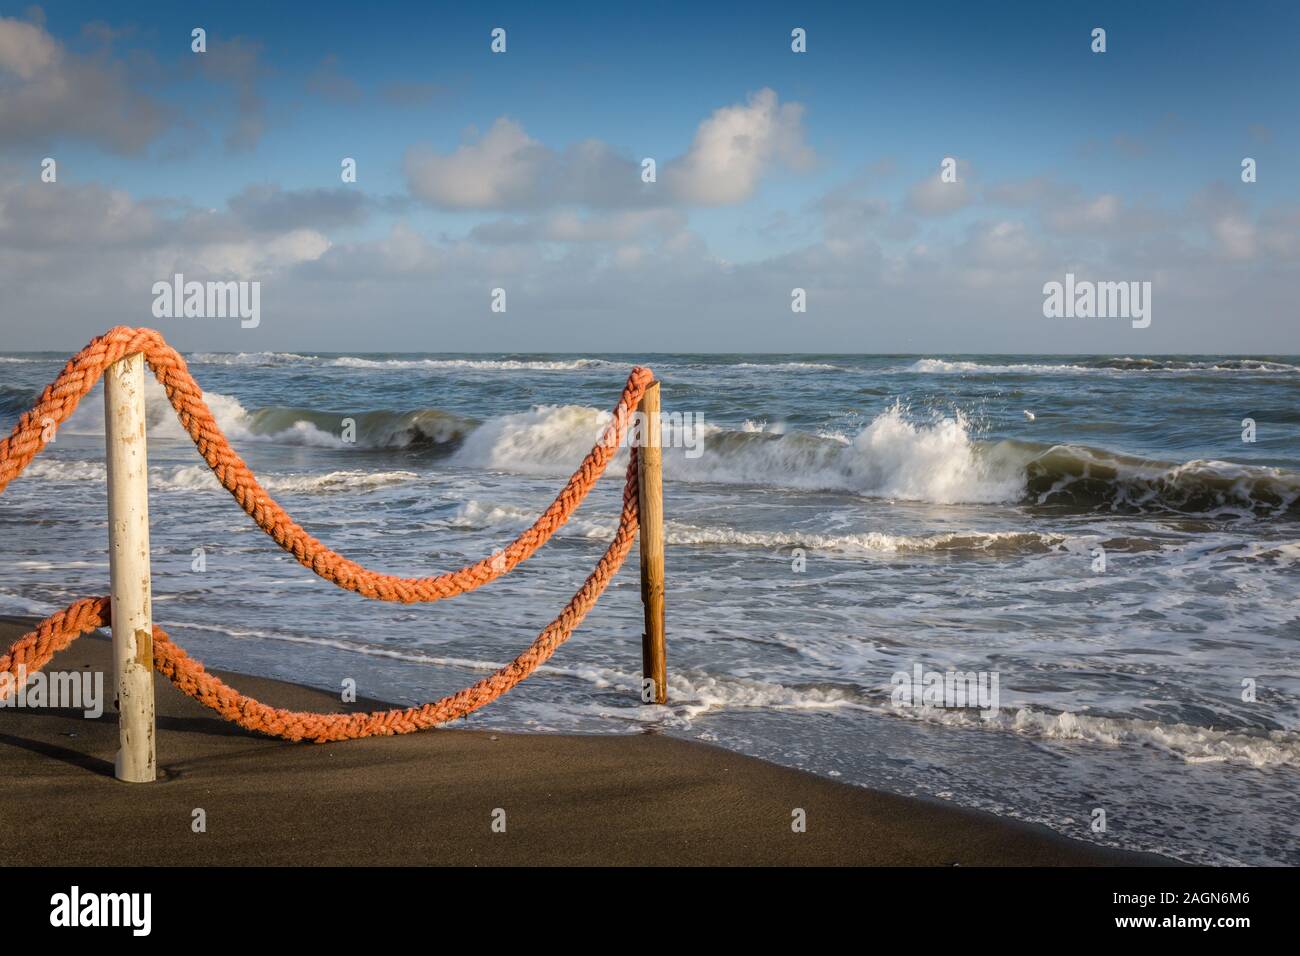 Late afternoon beach, sea edge with rope fence looking out to sea with crashing waves Stock Photo